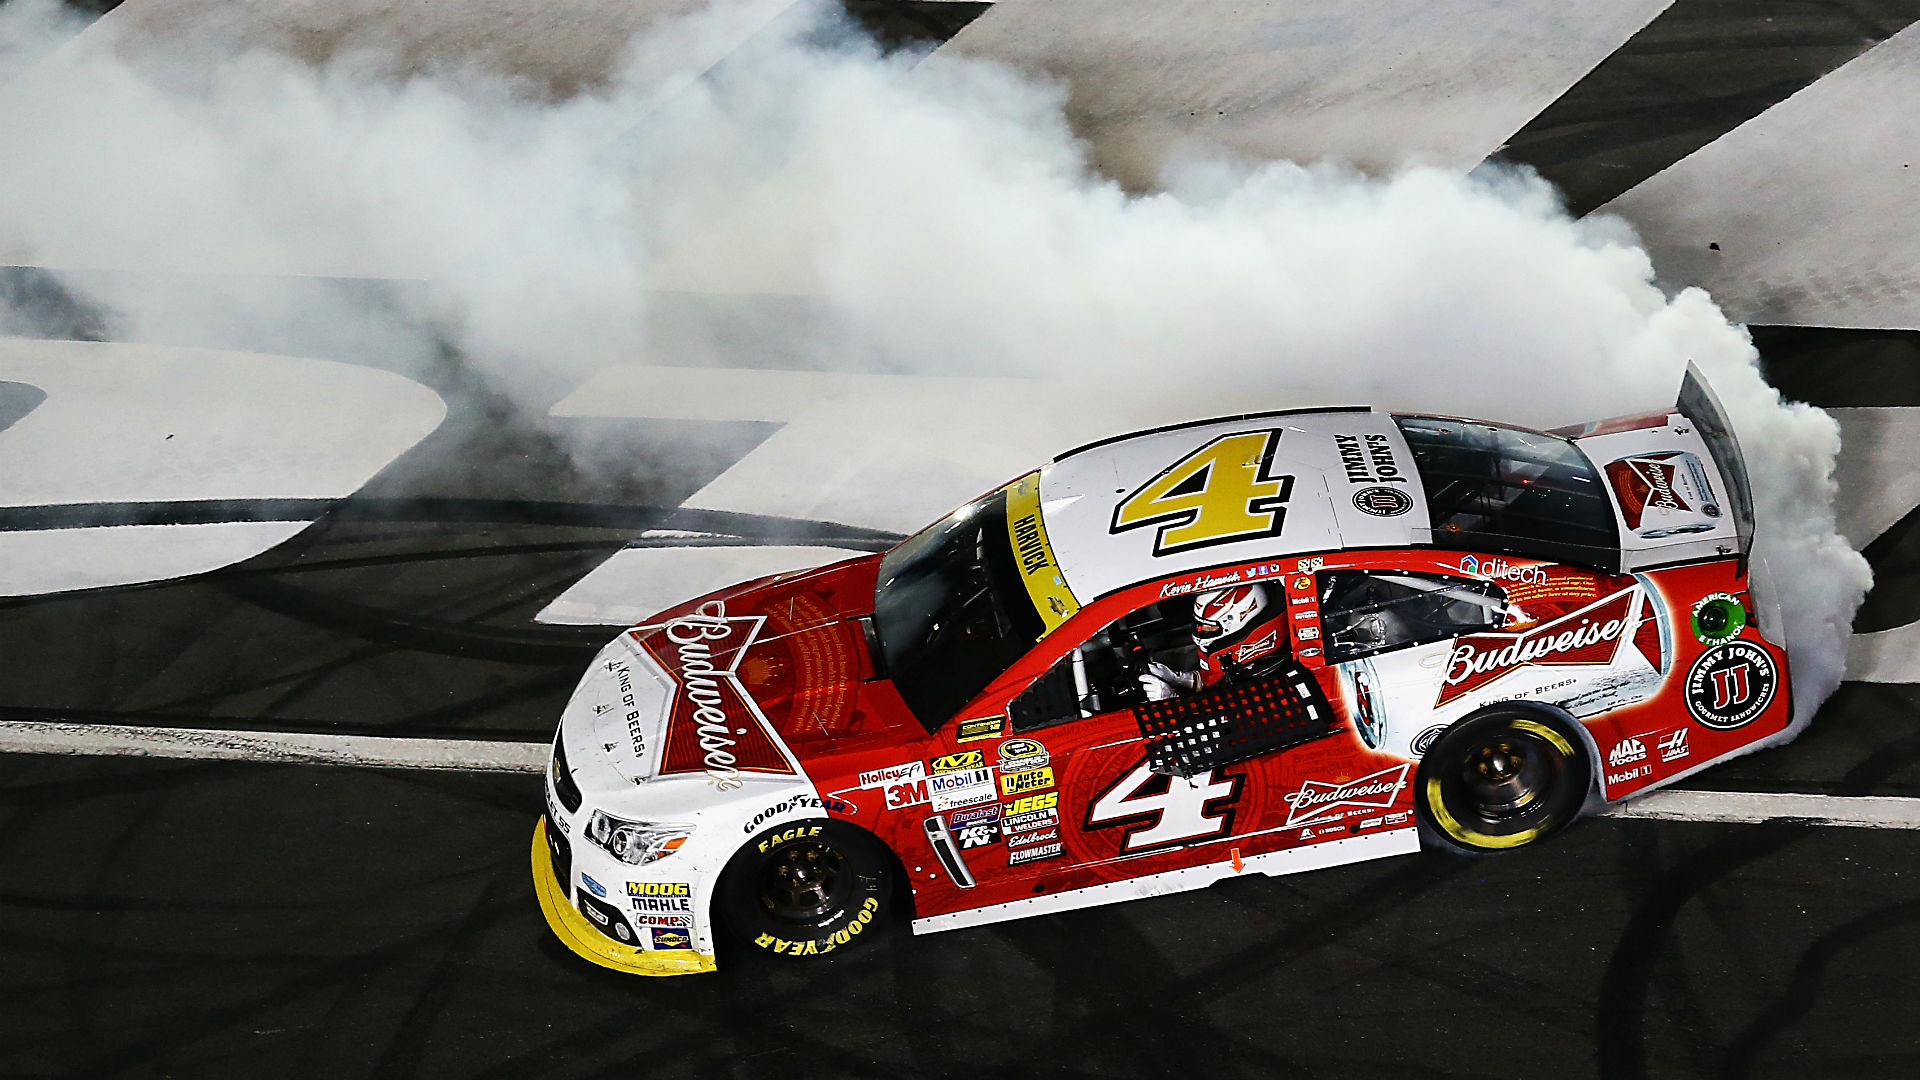 Kevin Harvick Wins As Fight Erupts After Cup Race At